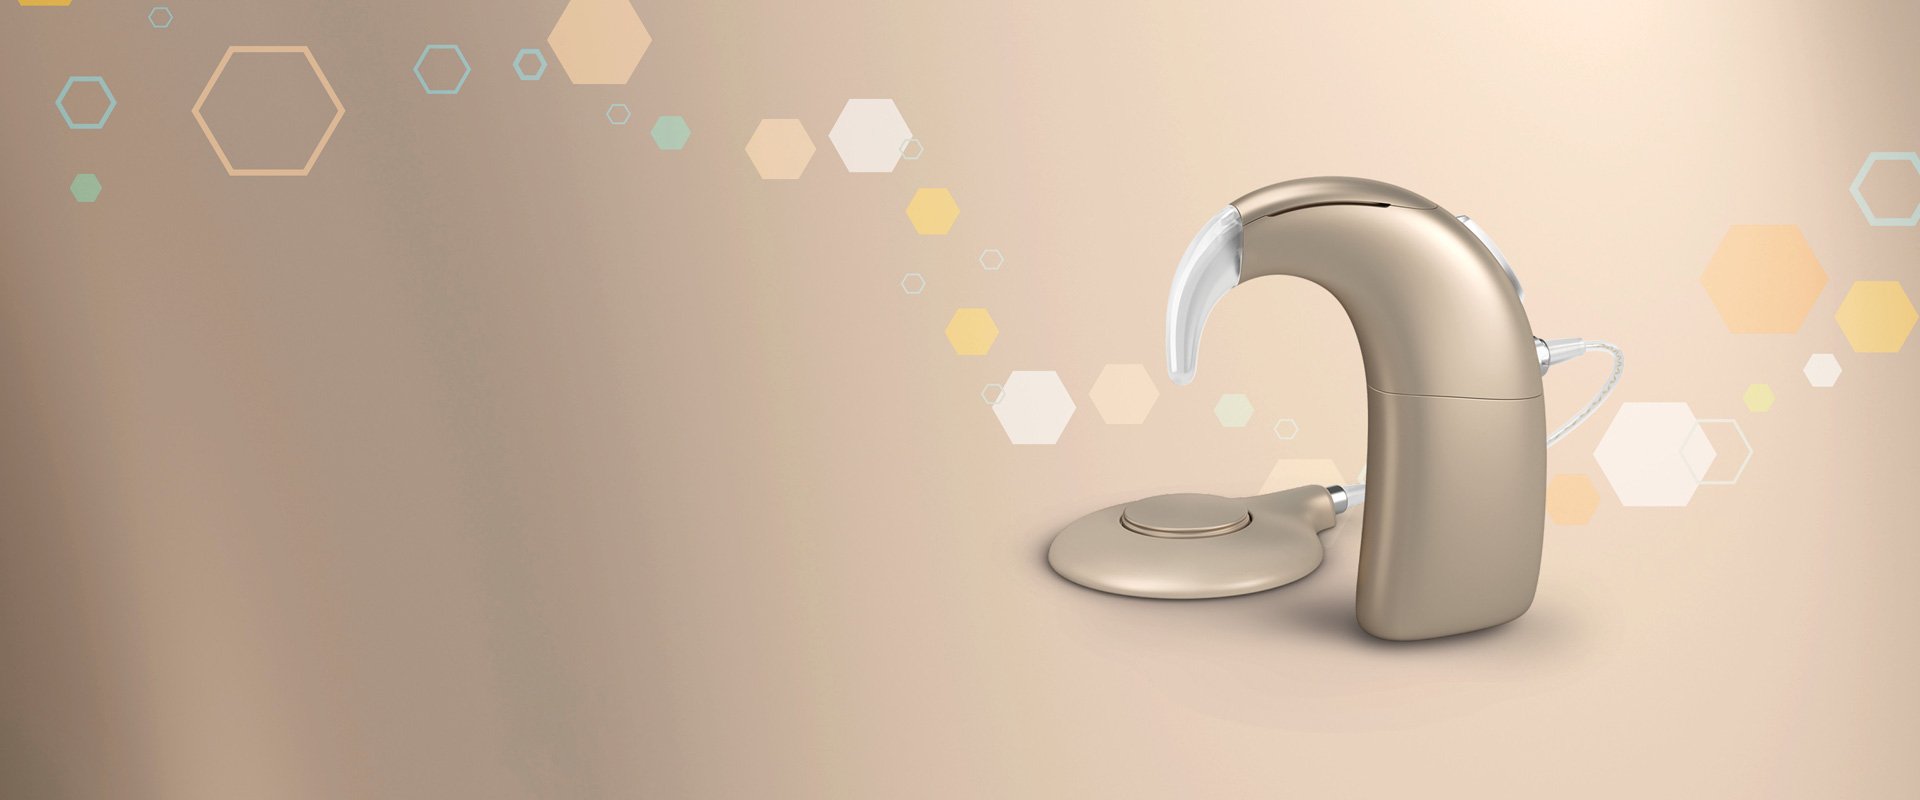 Neuro 2 is the smallest Behind-The-Ear cochlear sound processor on the market